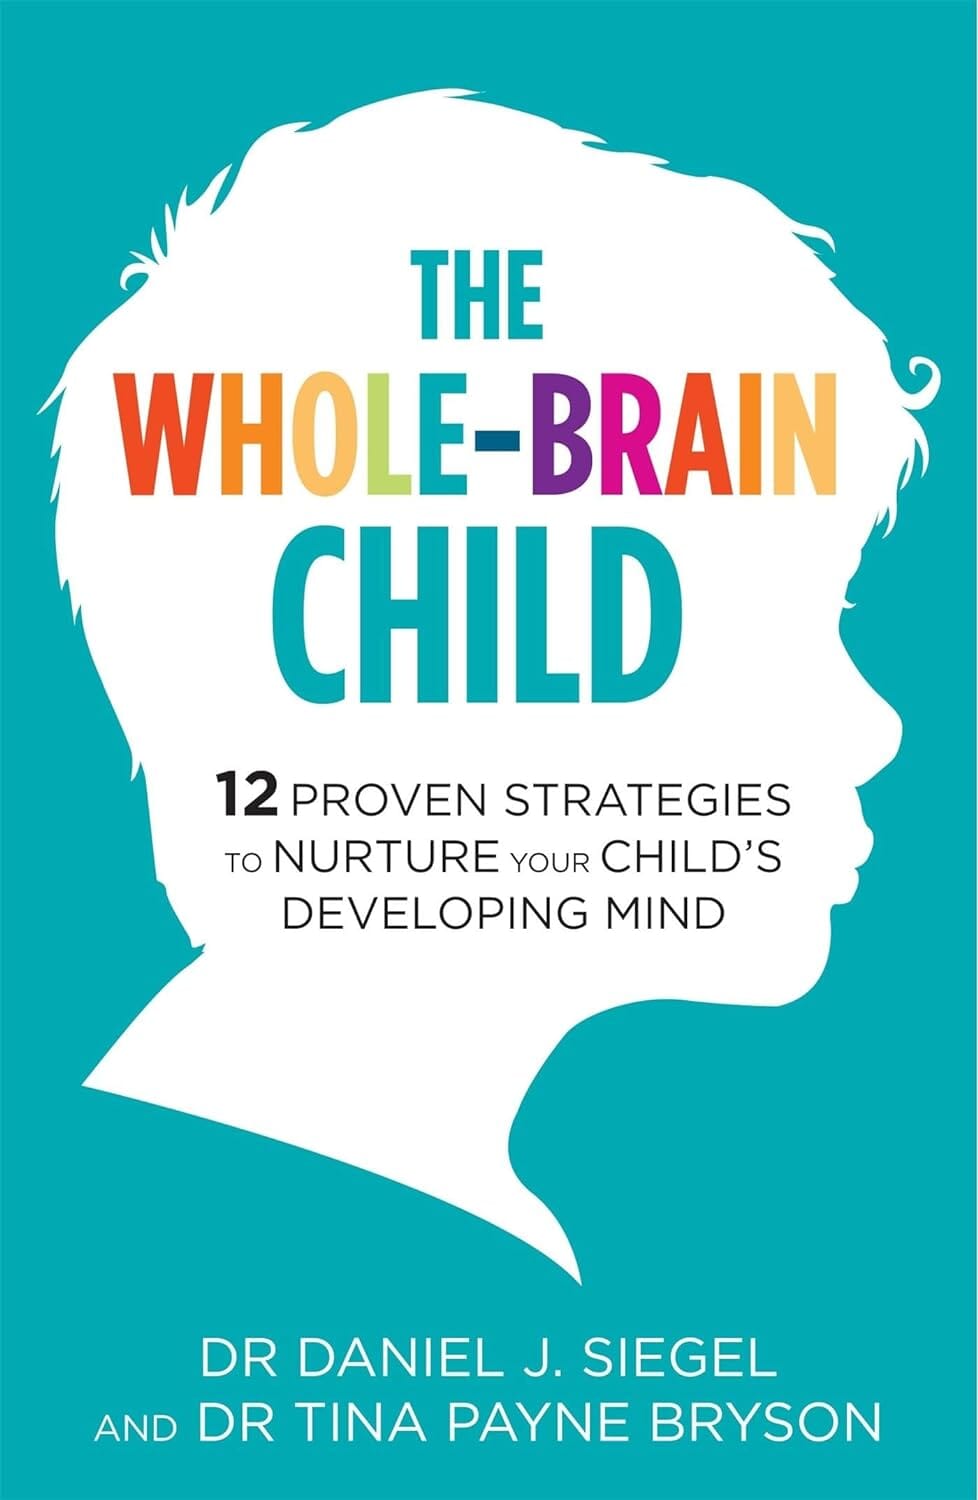 The Whole-Brain Child: 12 Proven Strategies to Nurture Your Child's Developing Mind by Dr. Tina Payne Bryson - Non Fiction - Paperback Non-Fiction Hachette